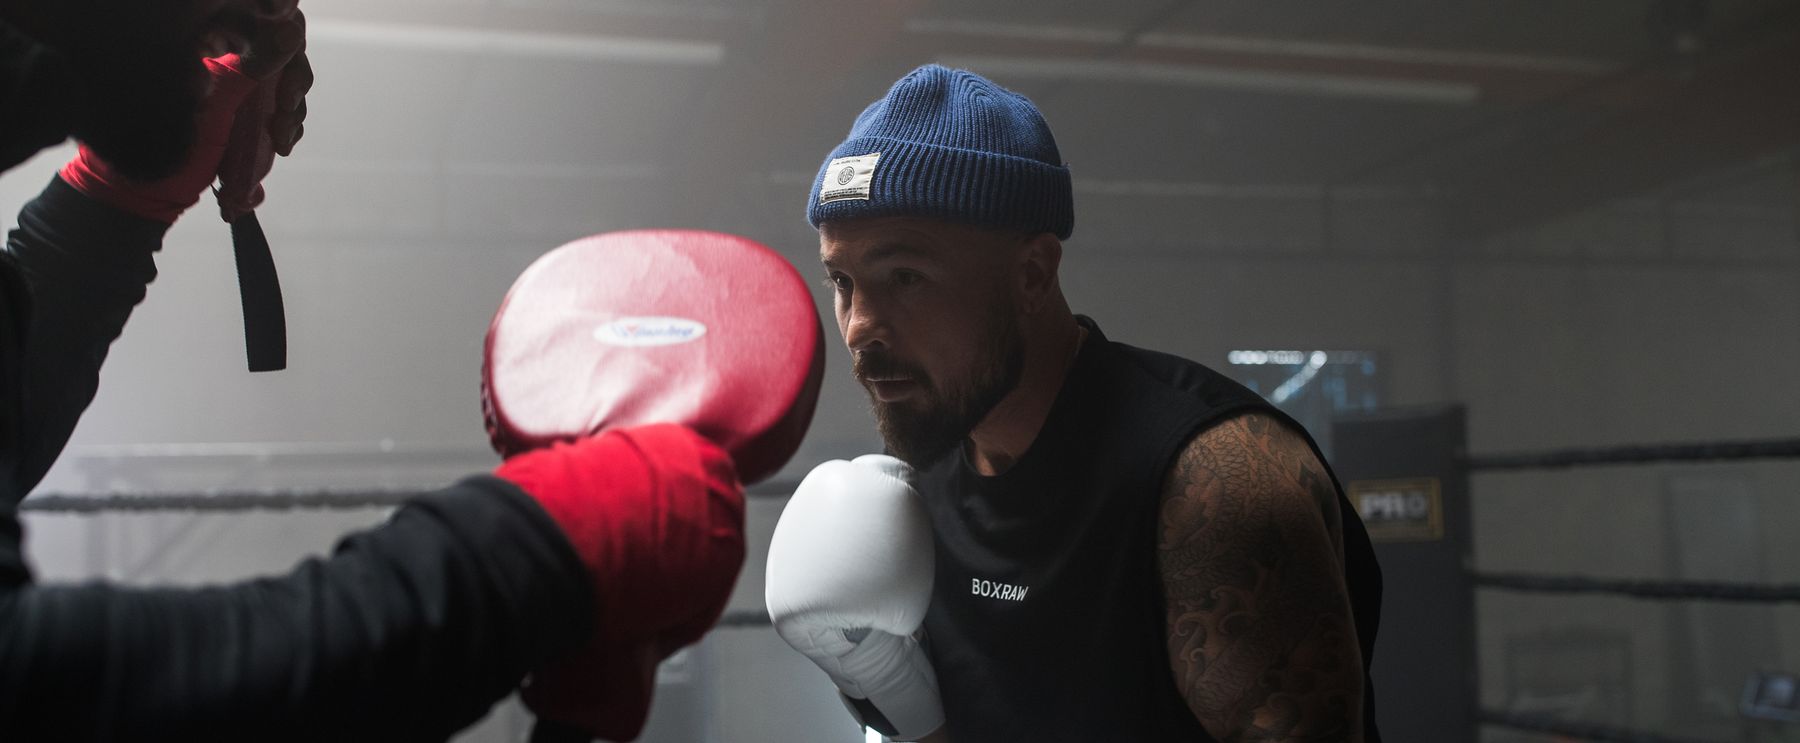 Life of a Boxer: How a Boxer Trains To Fight